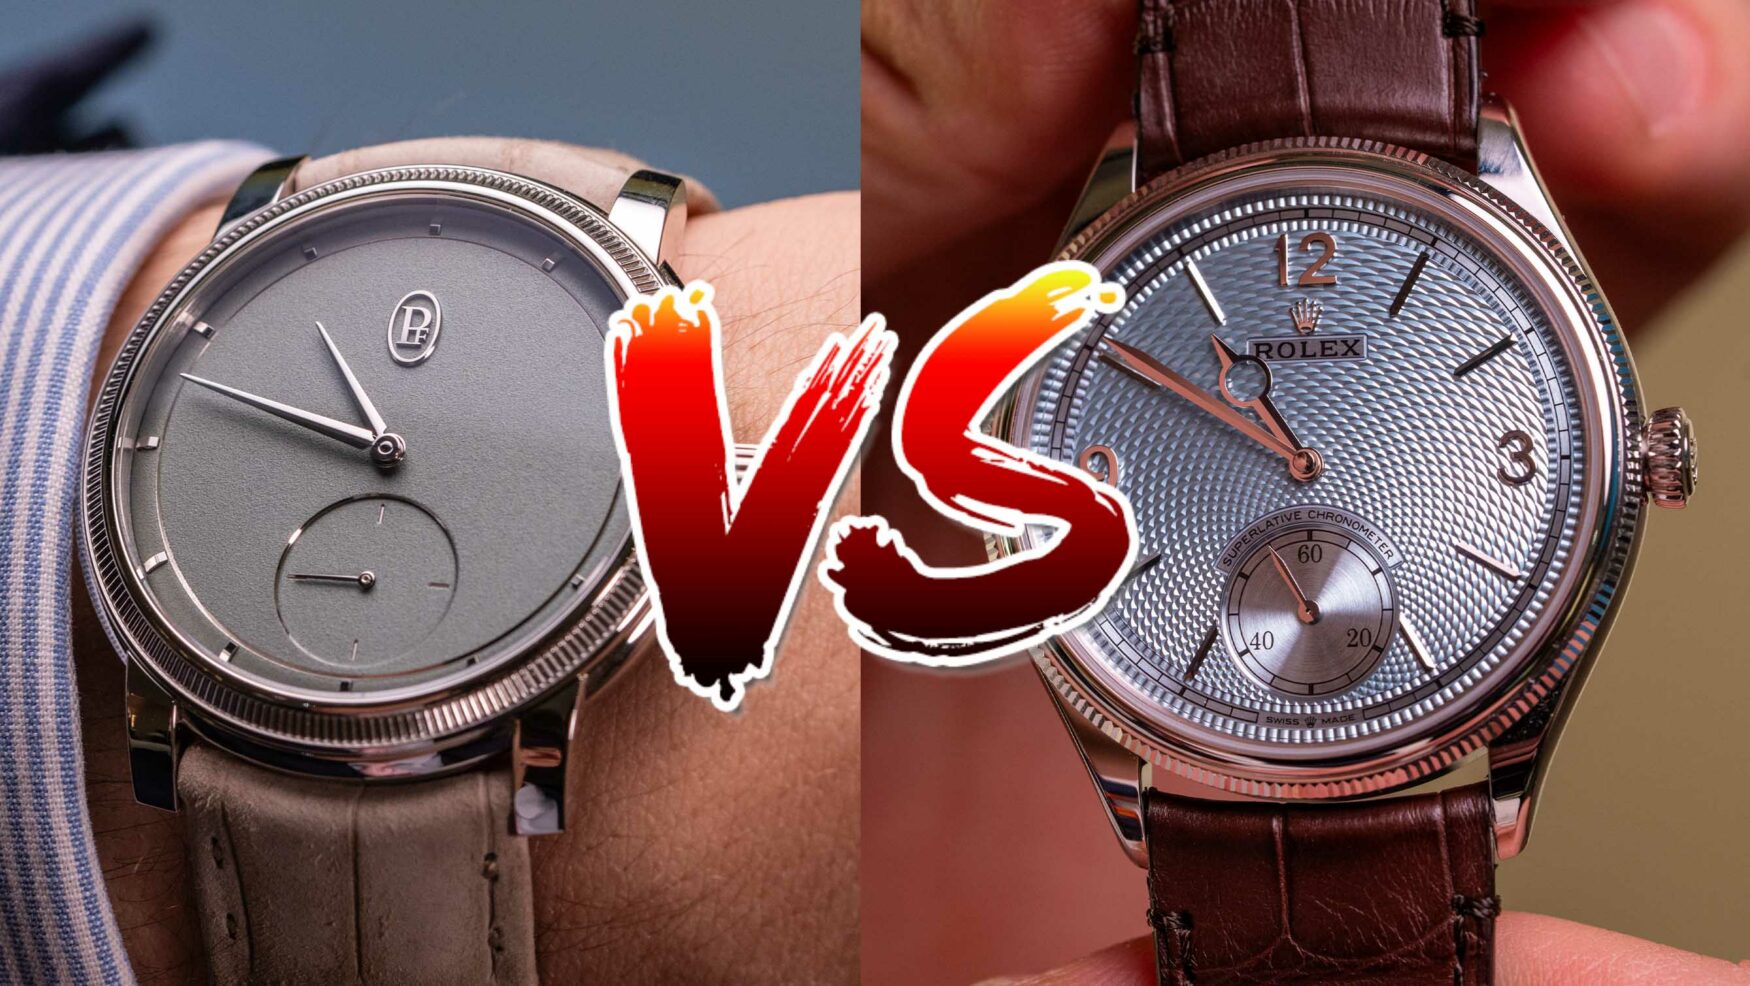 Can the Parmigiani Fleurier Toric Petite Seconde challenge the Rolex 1908 at nearly double its price?